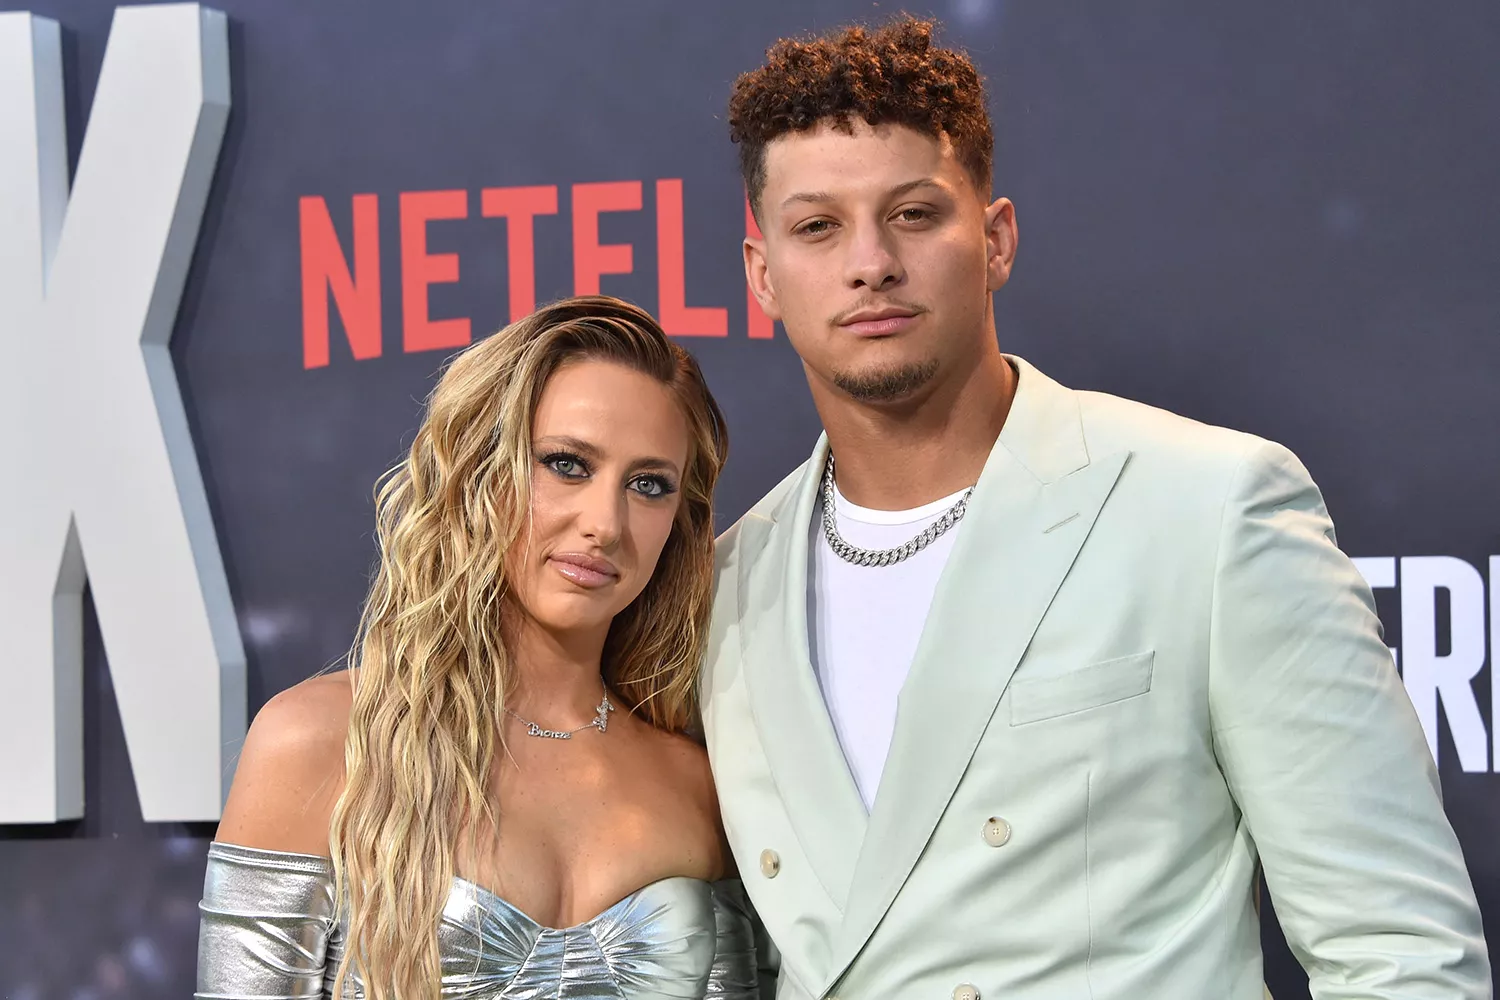 Patrick Mahomes and his wife Brittany Mahomes arrive for the premiere of Netflix's docuseries "Quarterback" 